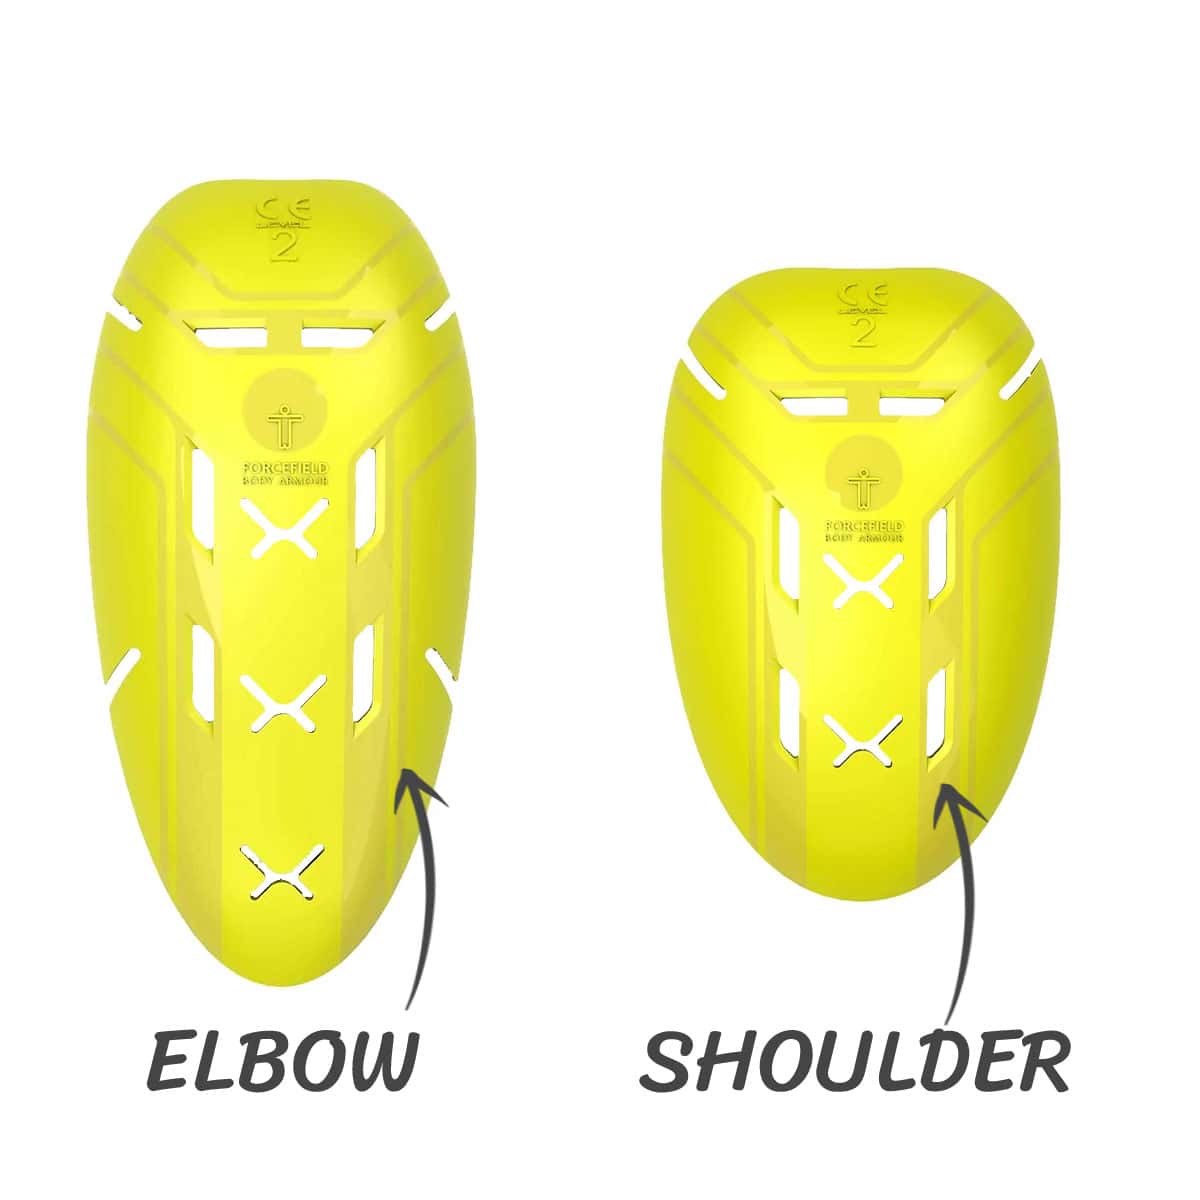 Forcefield Isolator 2 motorcycle elbow & shoulder protectors: Replace bulky armour inserts with a slimline CE Level 2 protector